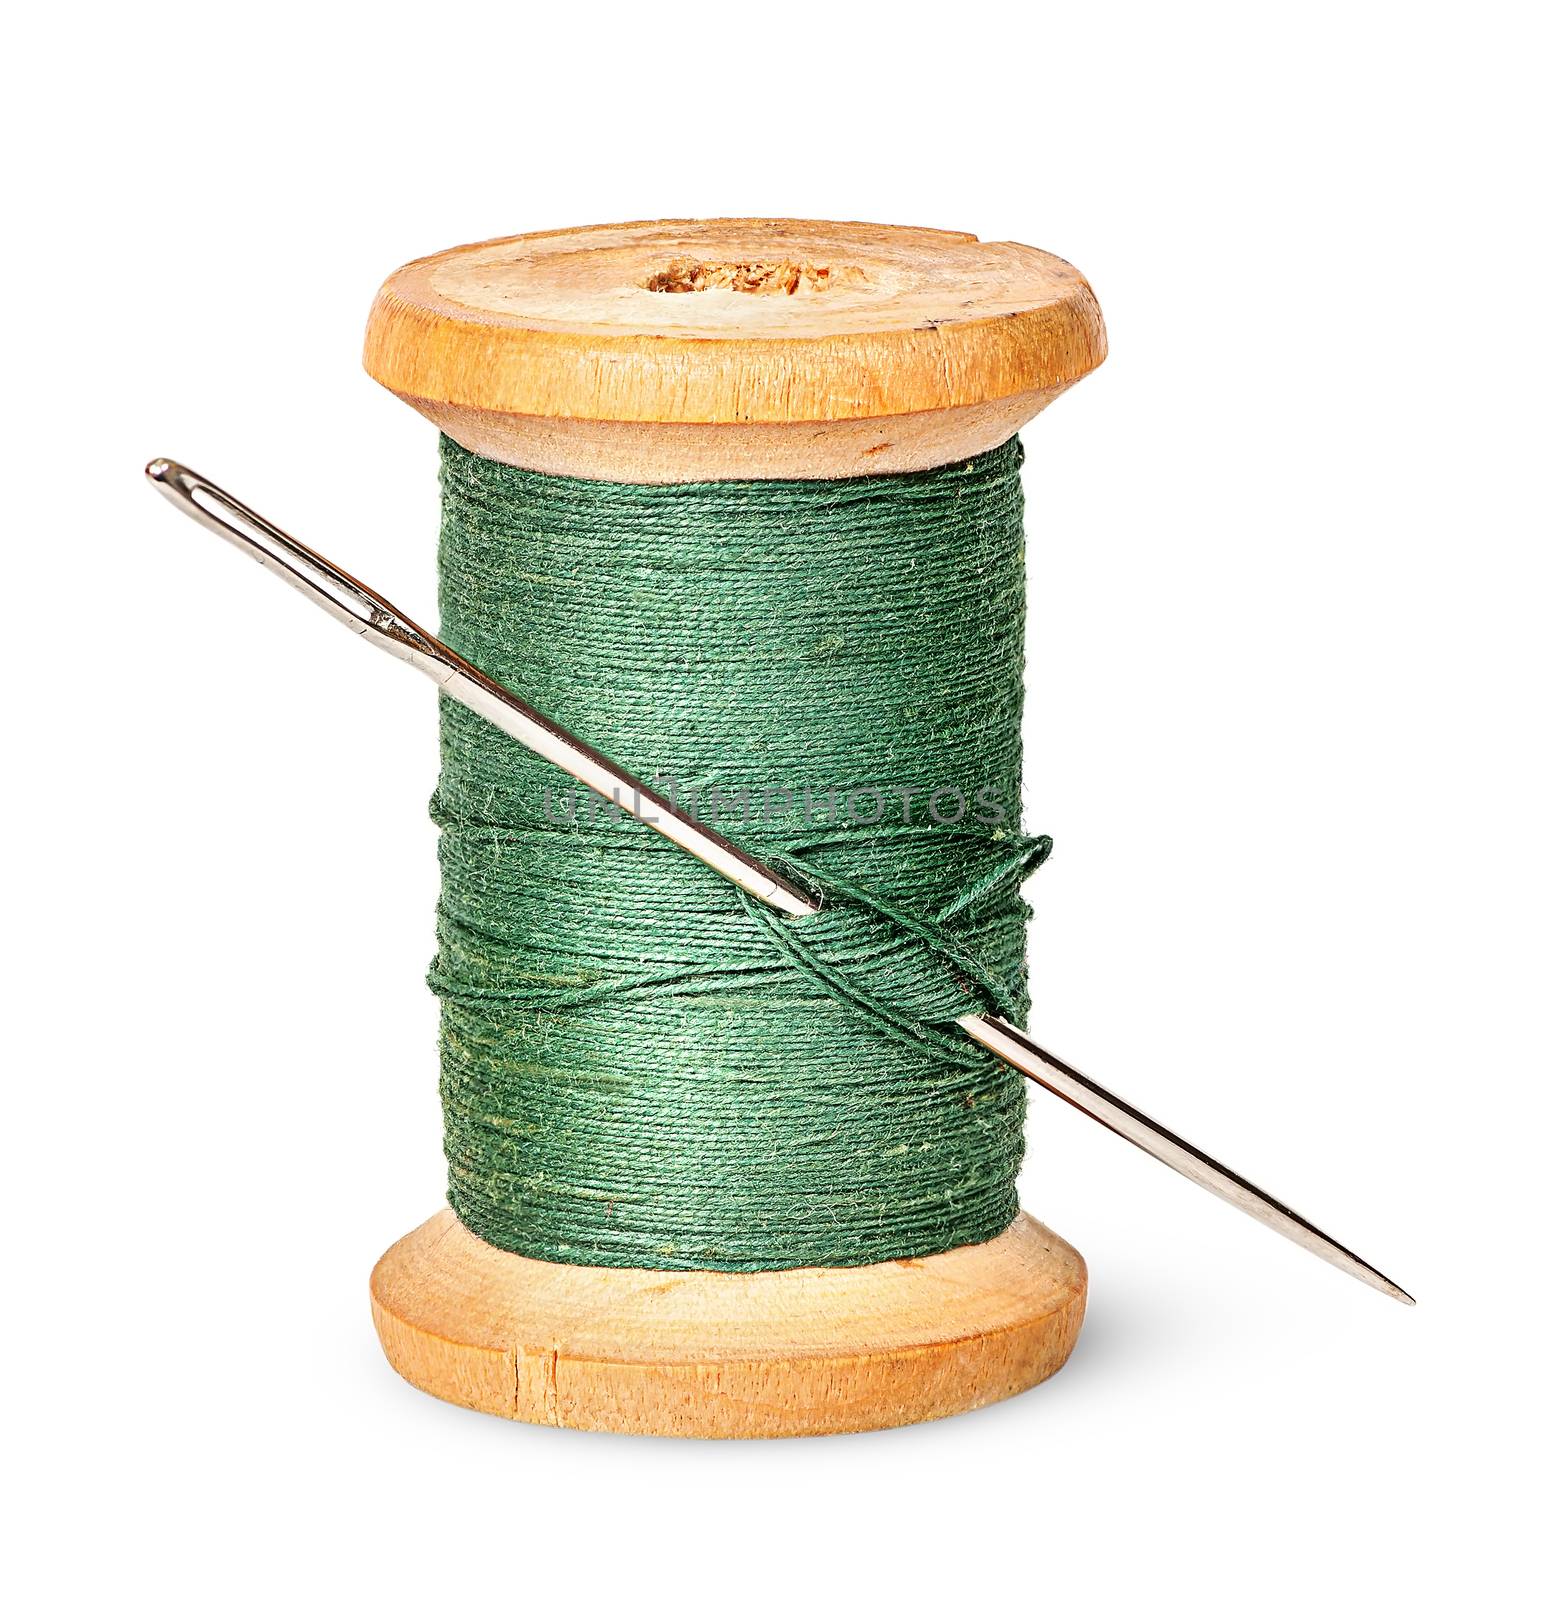 Needle and thread on wooden spool vertically by Cipariss